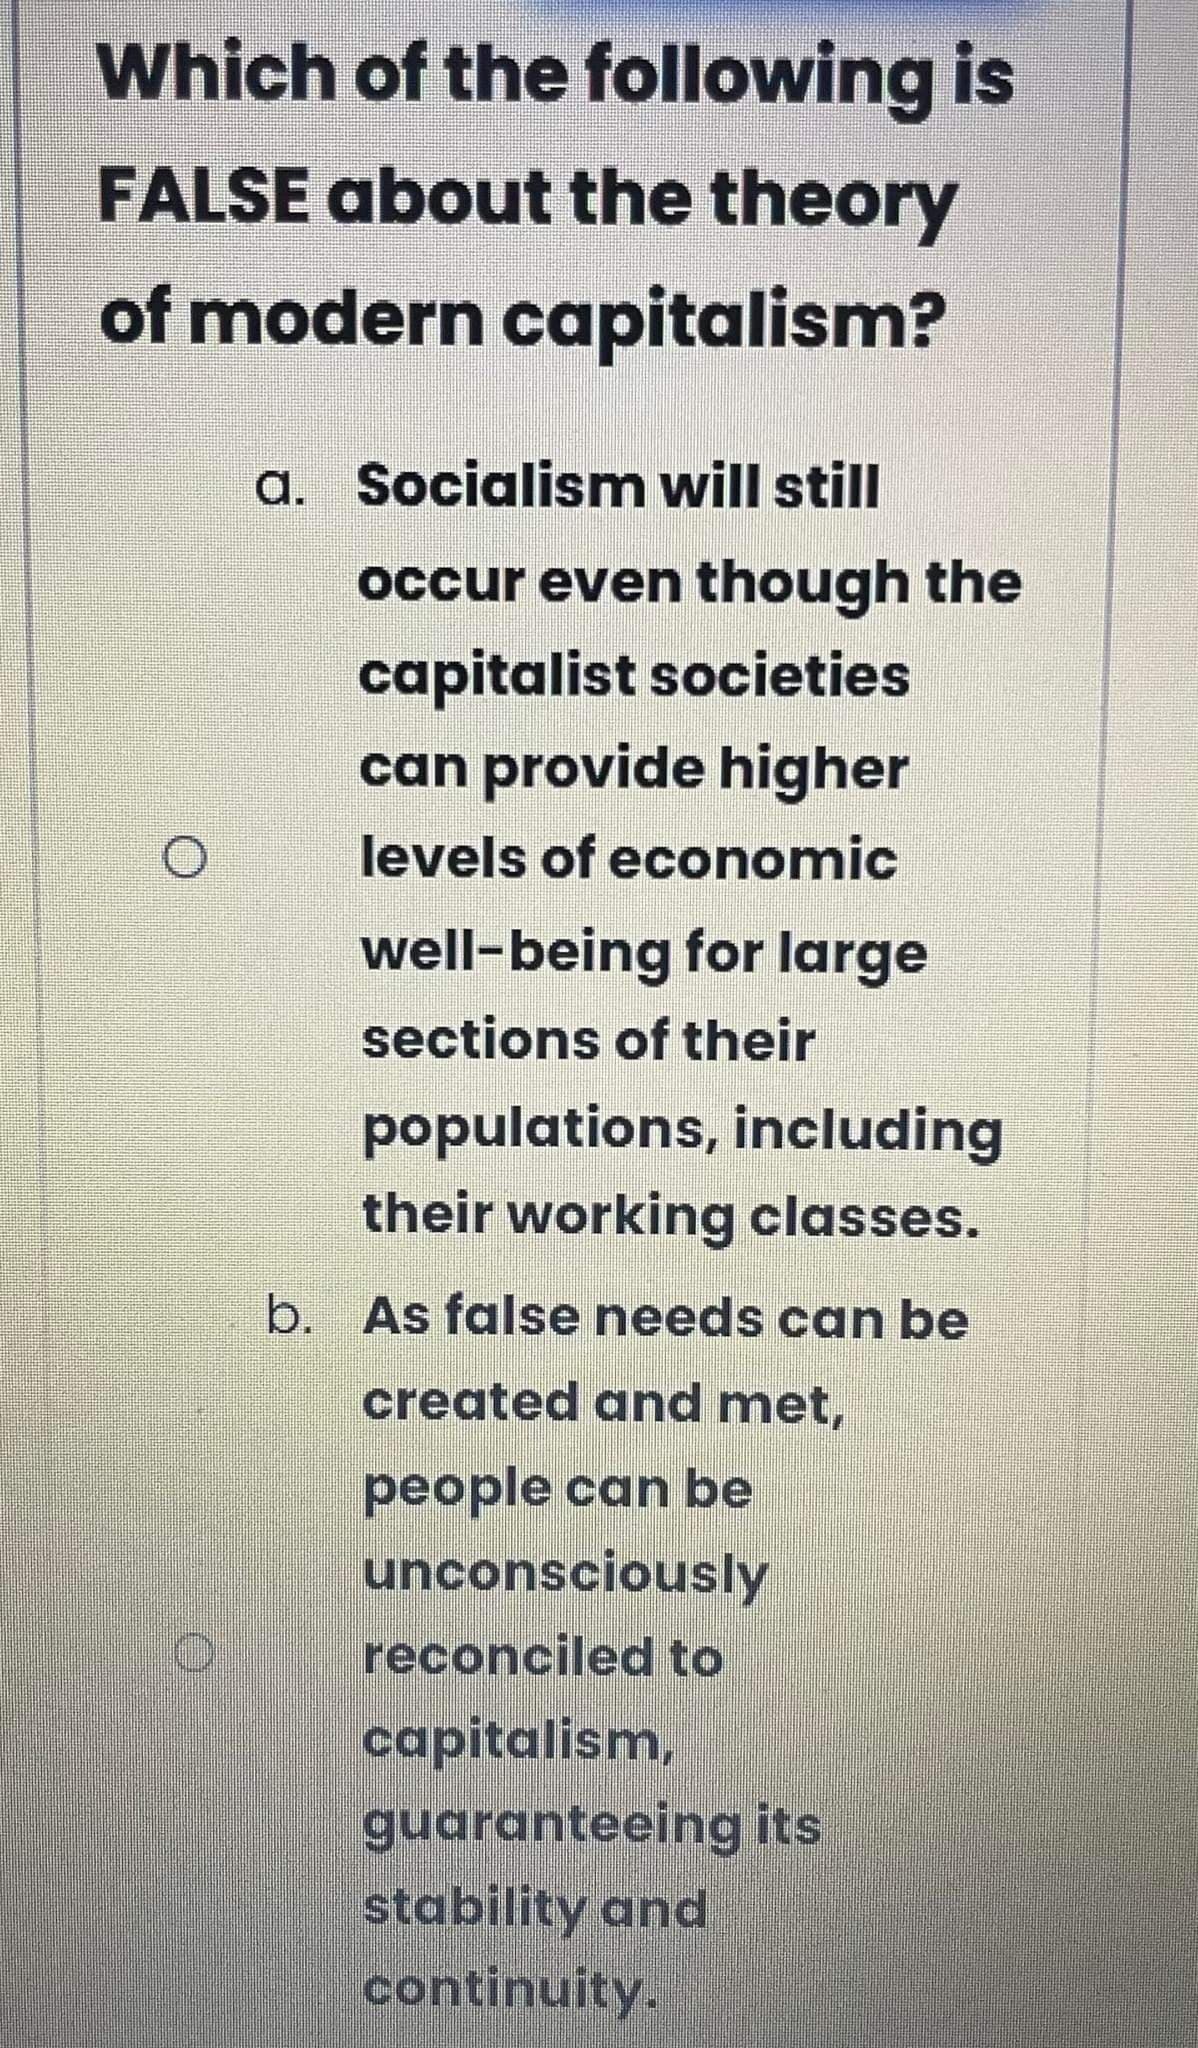 Which of the following is
FALSE about the theory
of modern capitalism?
a. Socialismn will still
occur even though the
capitalist societies
can provide higher
levels of economic
well-being for large
sections of their
populations, including
their working classes.
b. As false needs can be
created and met,
people can be
unconsciously
reconciled to
capitalism,
guaranteeing its
stability and
continuity.
